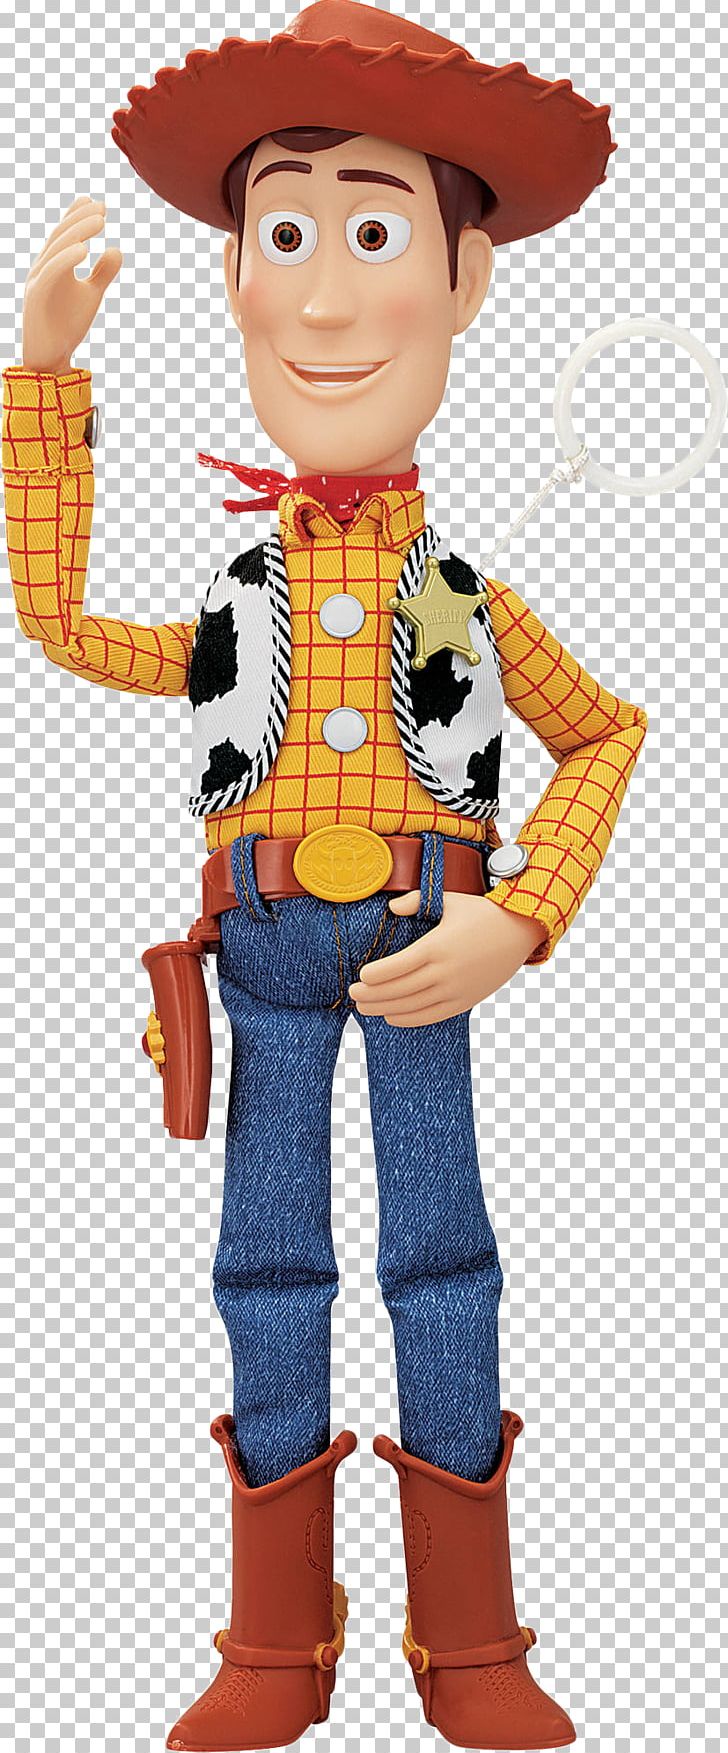 Sheriff Woody Toy Story Buzz Lightyear Jessie Action & Toy Figures PNG, Clipart, Action, Action Toy Figures, Amp, Buzz Lightyear, Cartoon Free PNG Download